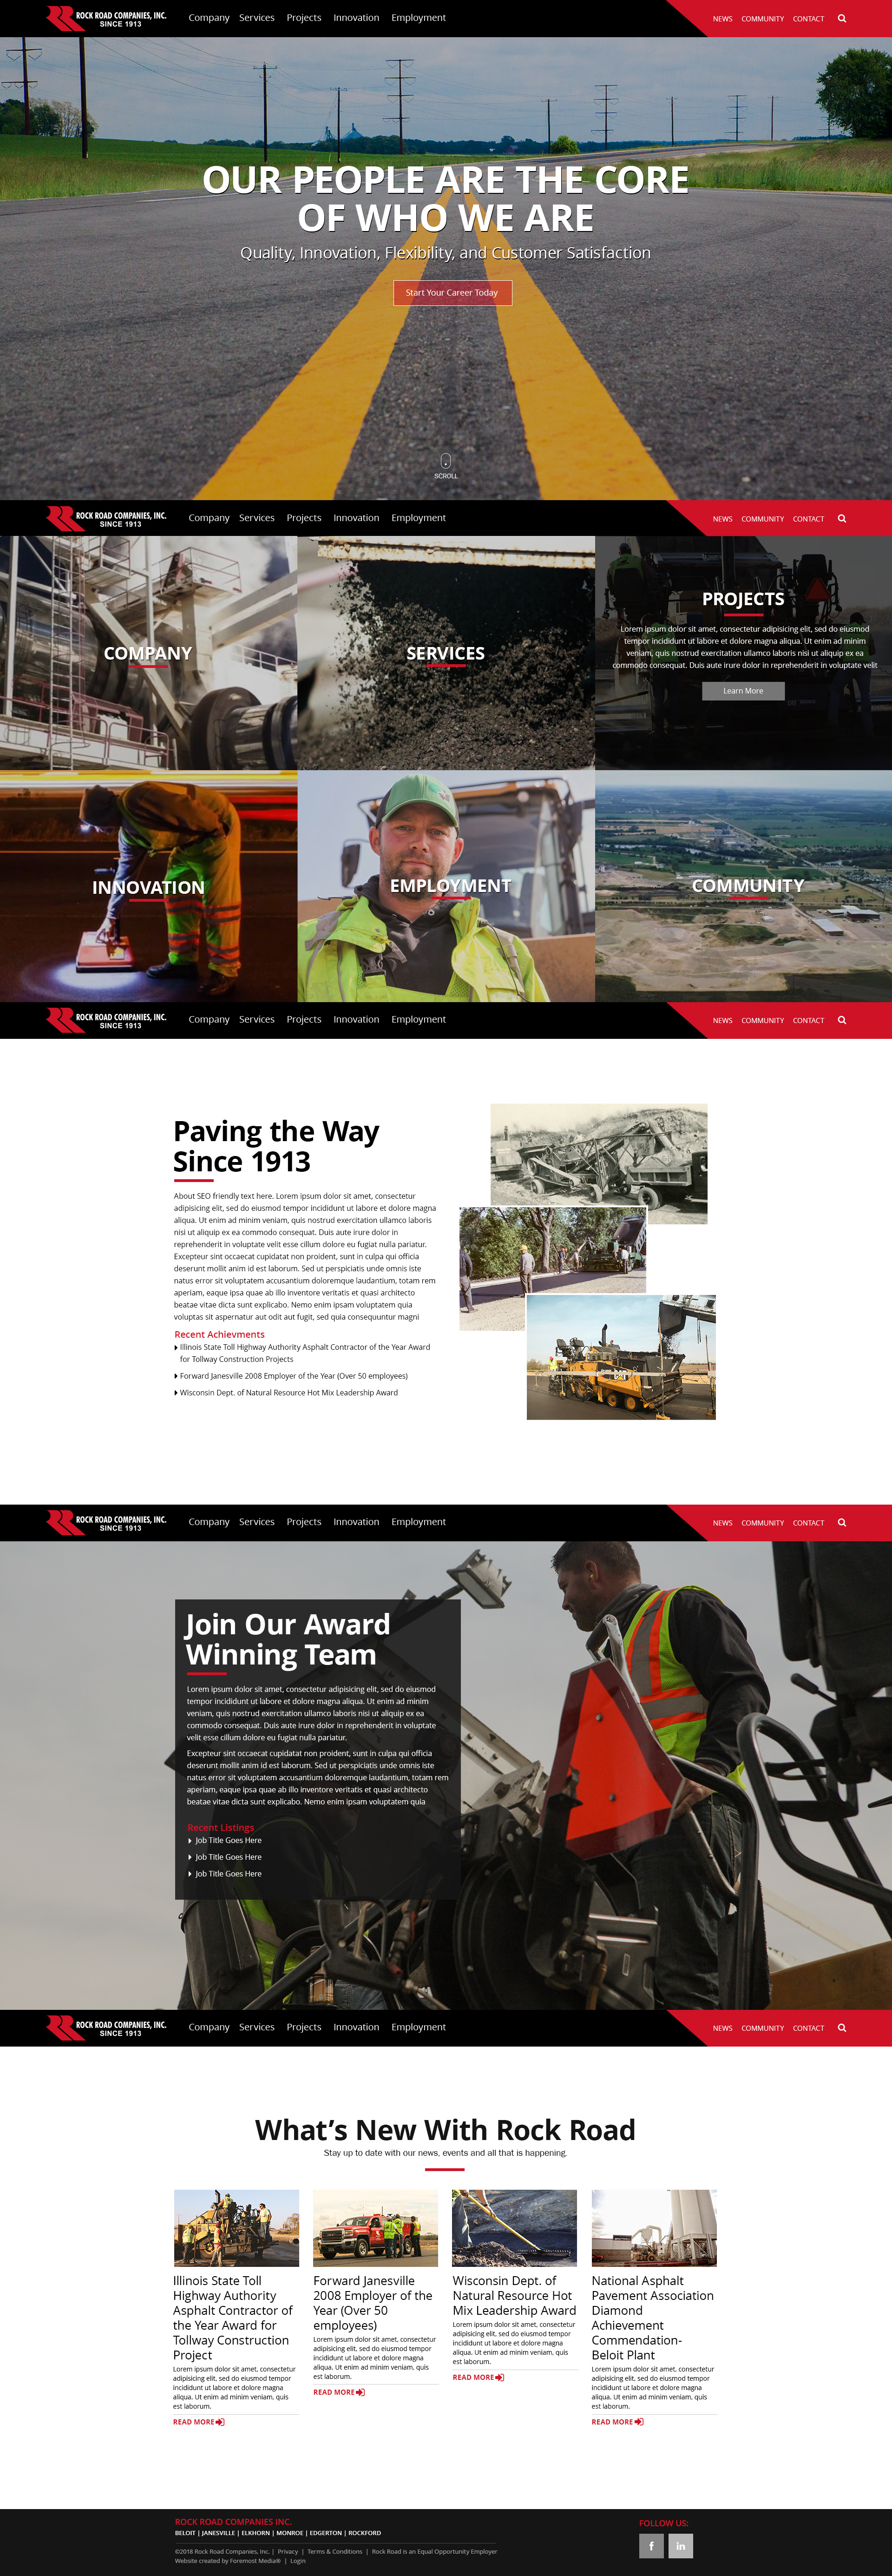 Example of the new and improved DNN website designed by Foremost Media for Rock Road Companies, INC.